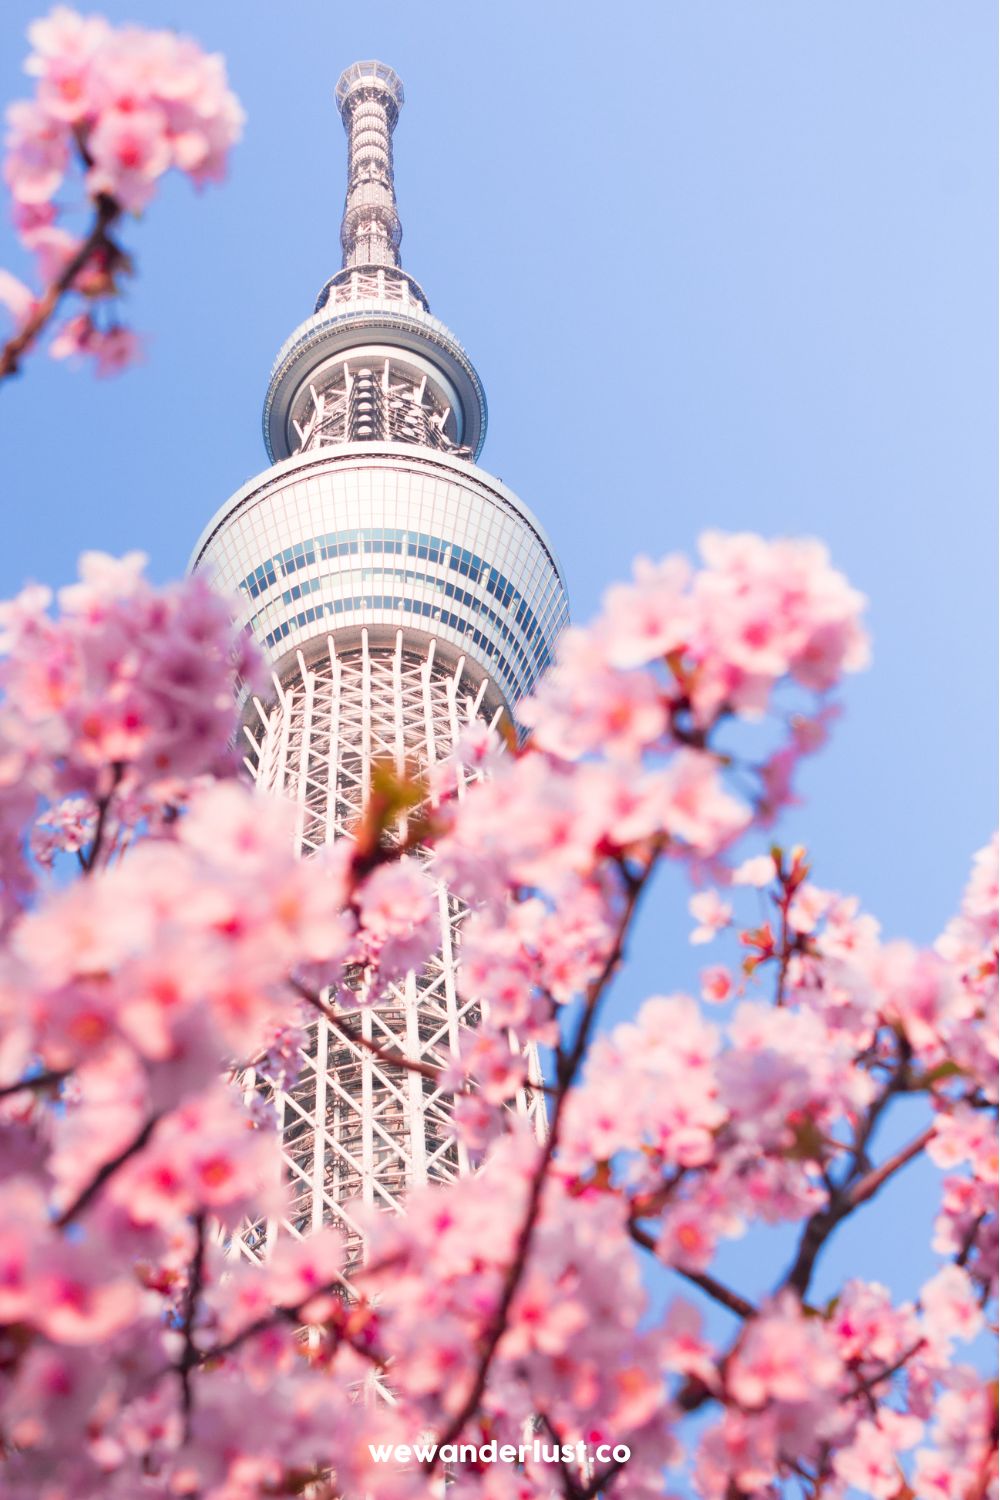 view of tokyo tower through cherry blossom trees wewanderlust.co